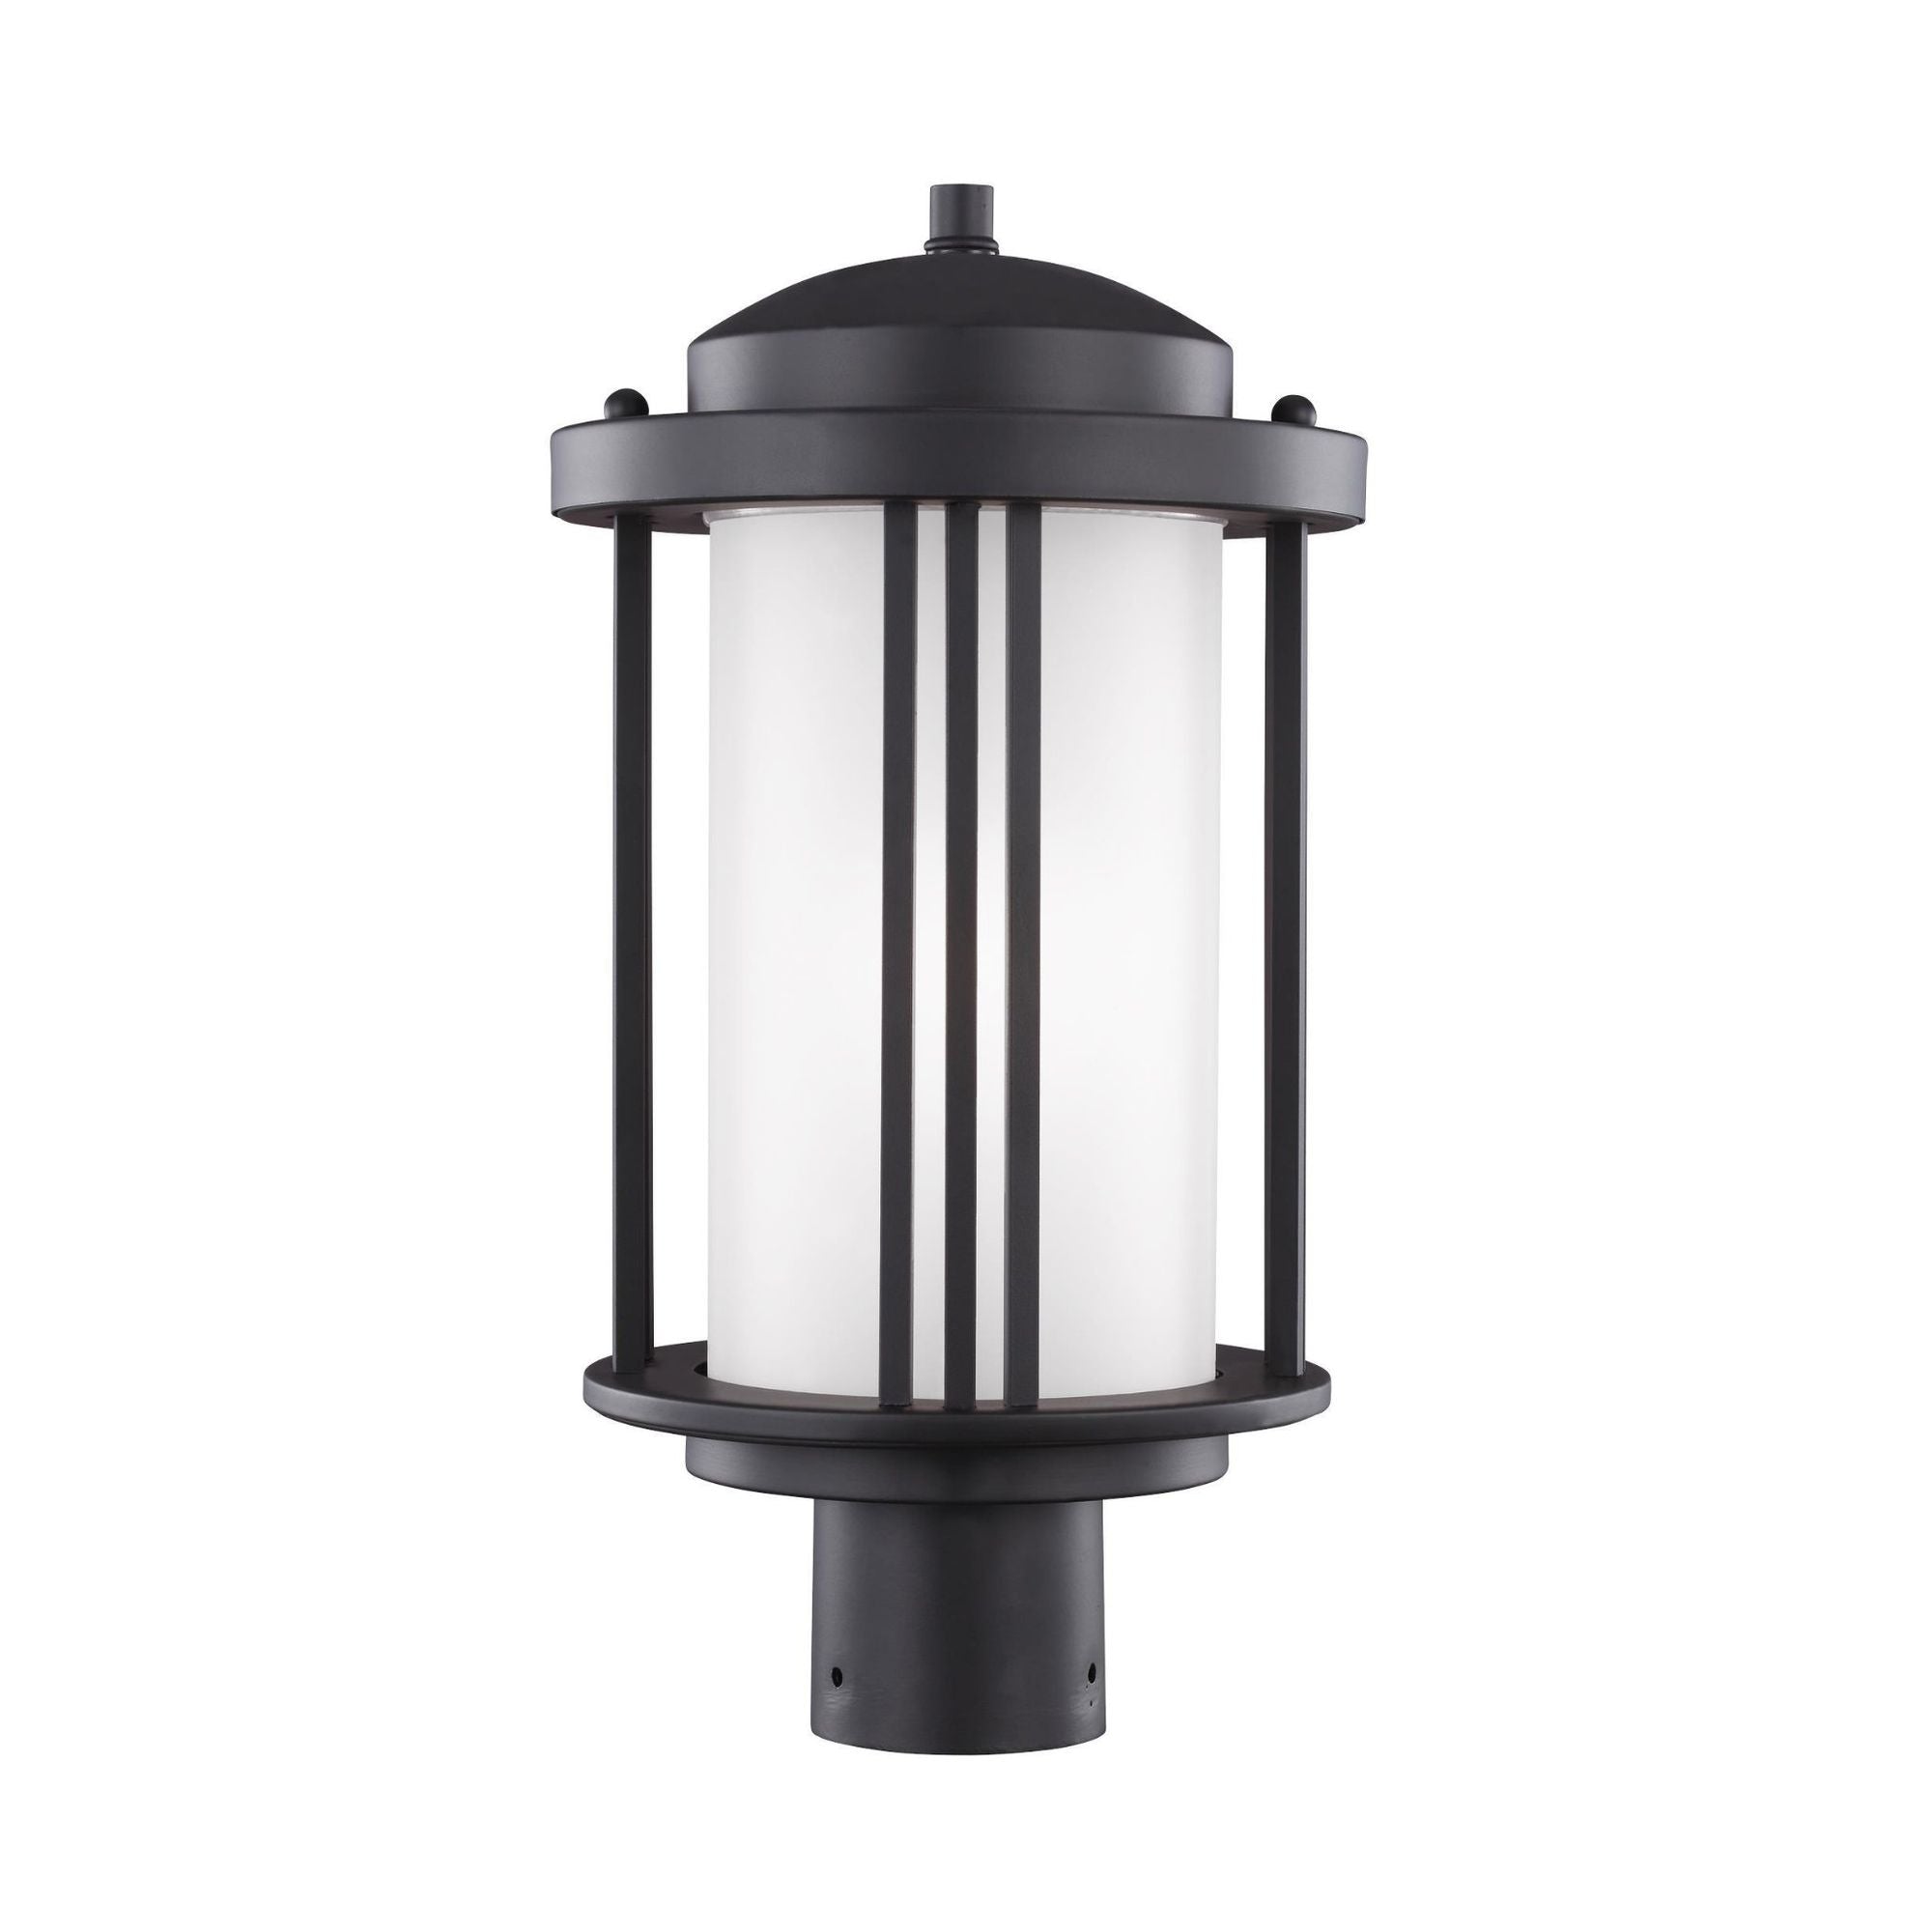 Crowell One Light Outdoor Post Lantern LED Contemporary Fixture 17" Height Aluminum Round Satin Etched Shade in Black